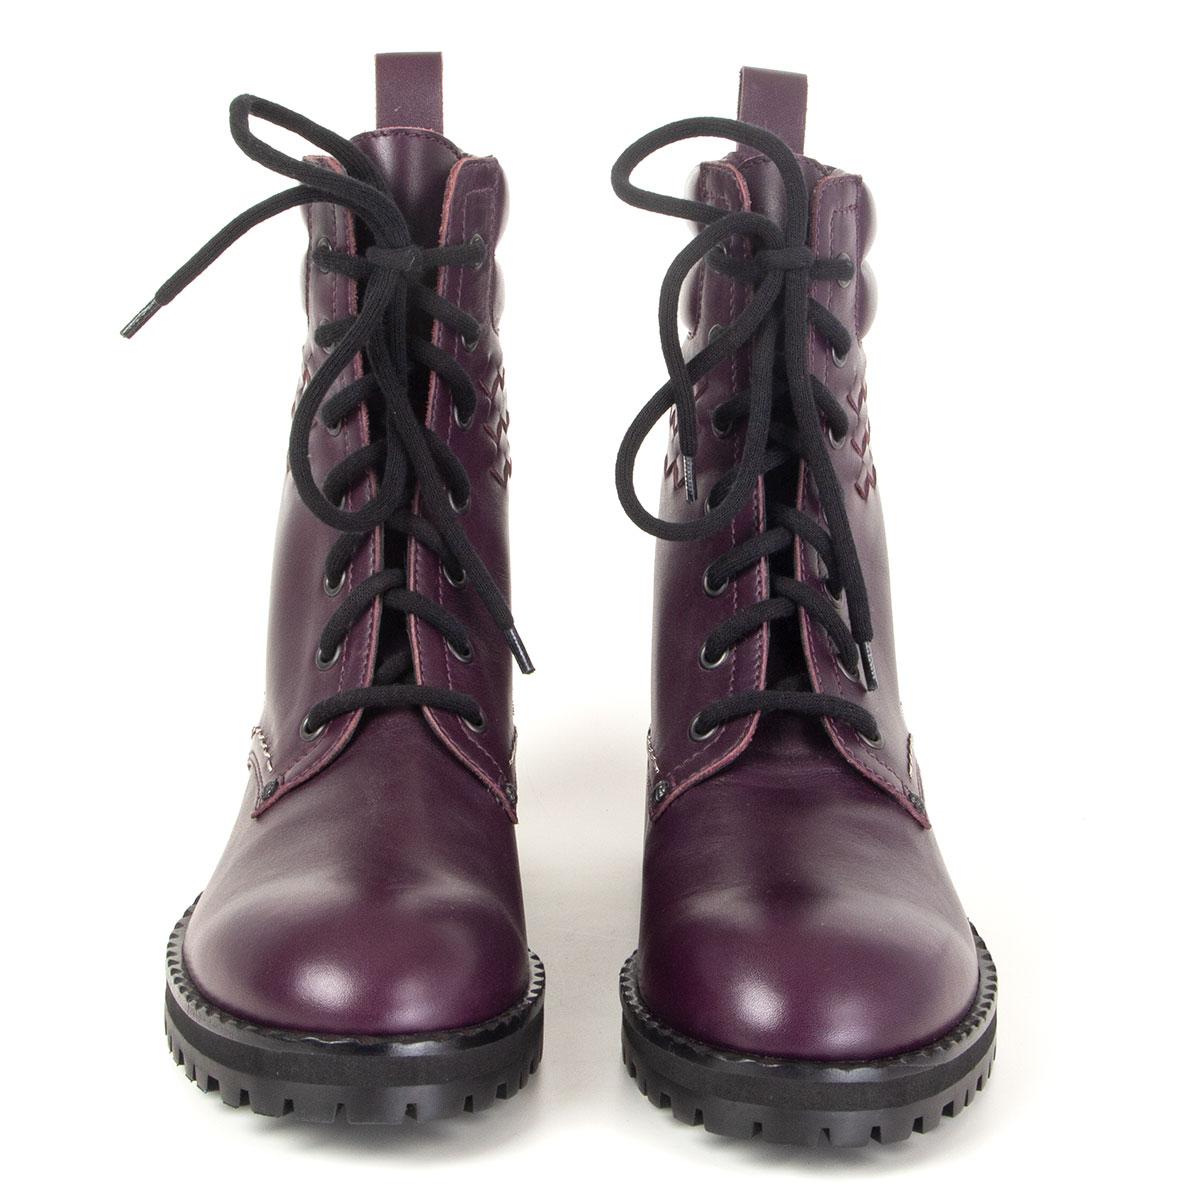 100% authentic Bottega Veneta lace-up Eldfell combat boots in grape tuscany calfskin with Intrecciato detail. Brand new. Come with dust bags. 

Measurements
Imprinted Size	38.5
Shoe Size	38.5
Inside Sole	25.5cm (9.9in)
Width	7.5cm (2.9in)
Heel	4cm